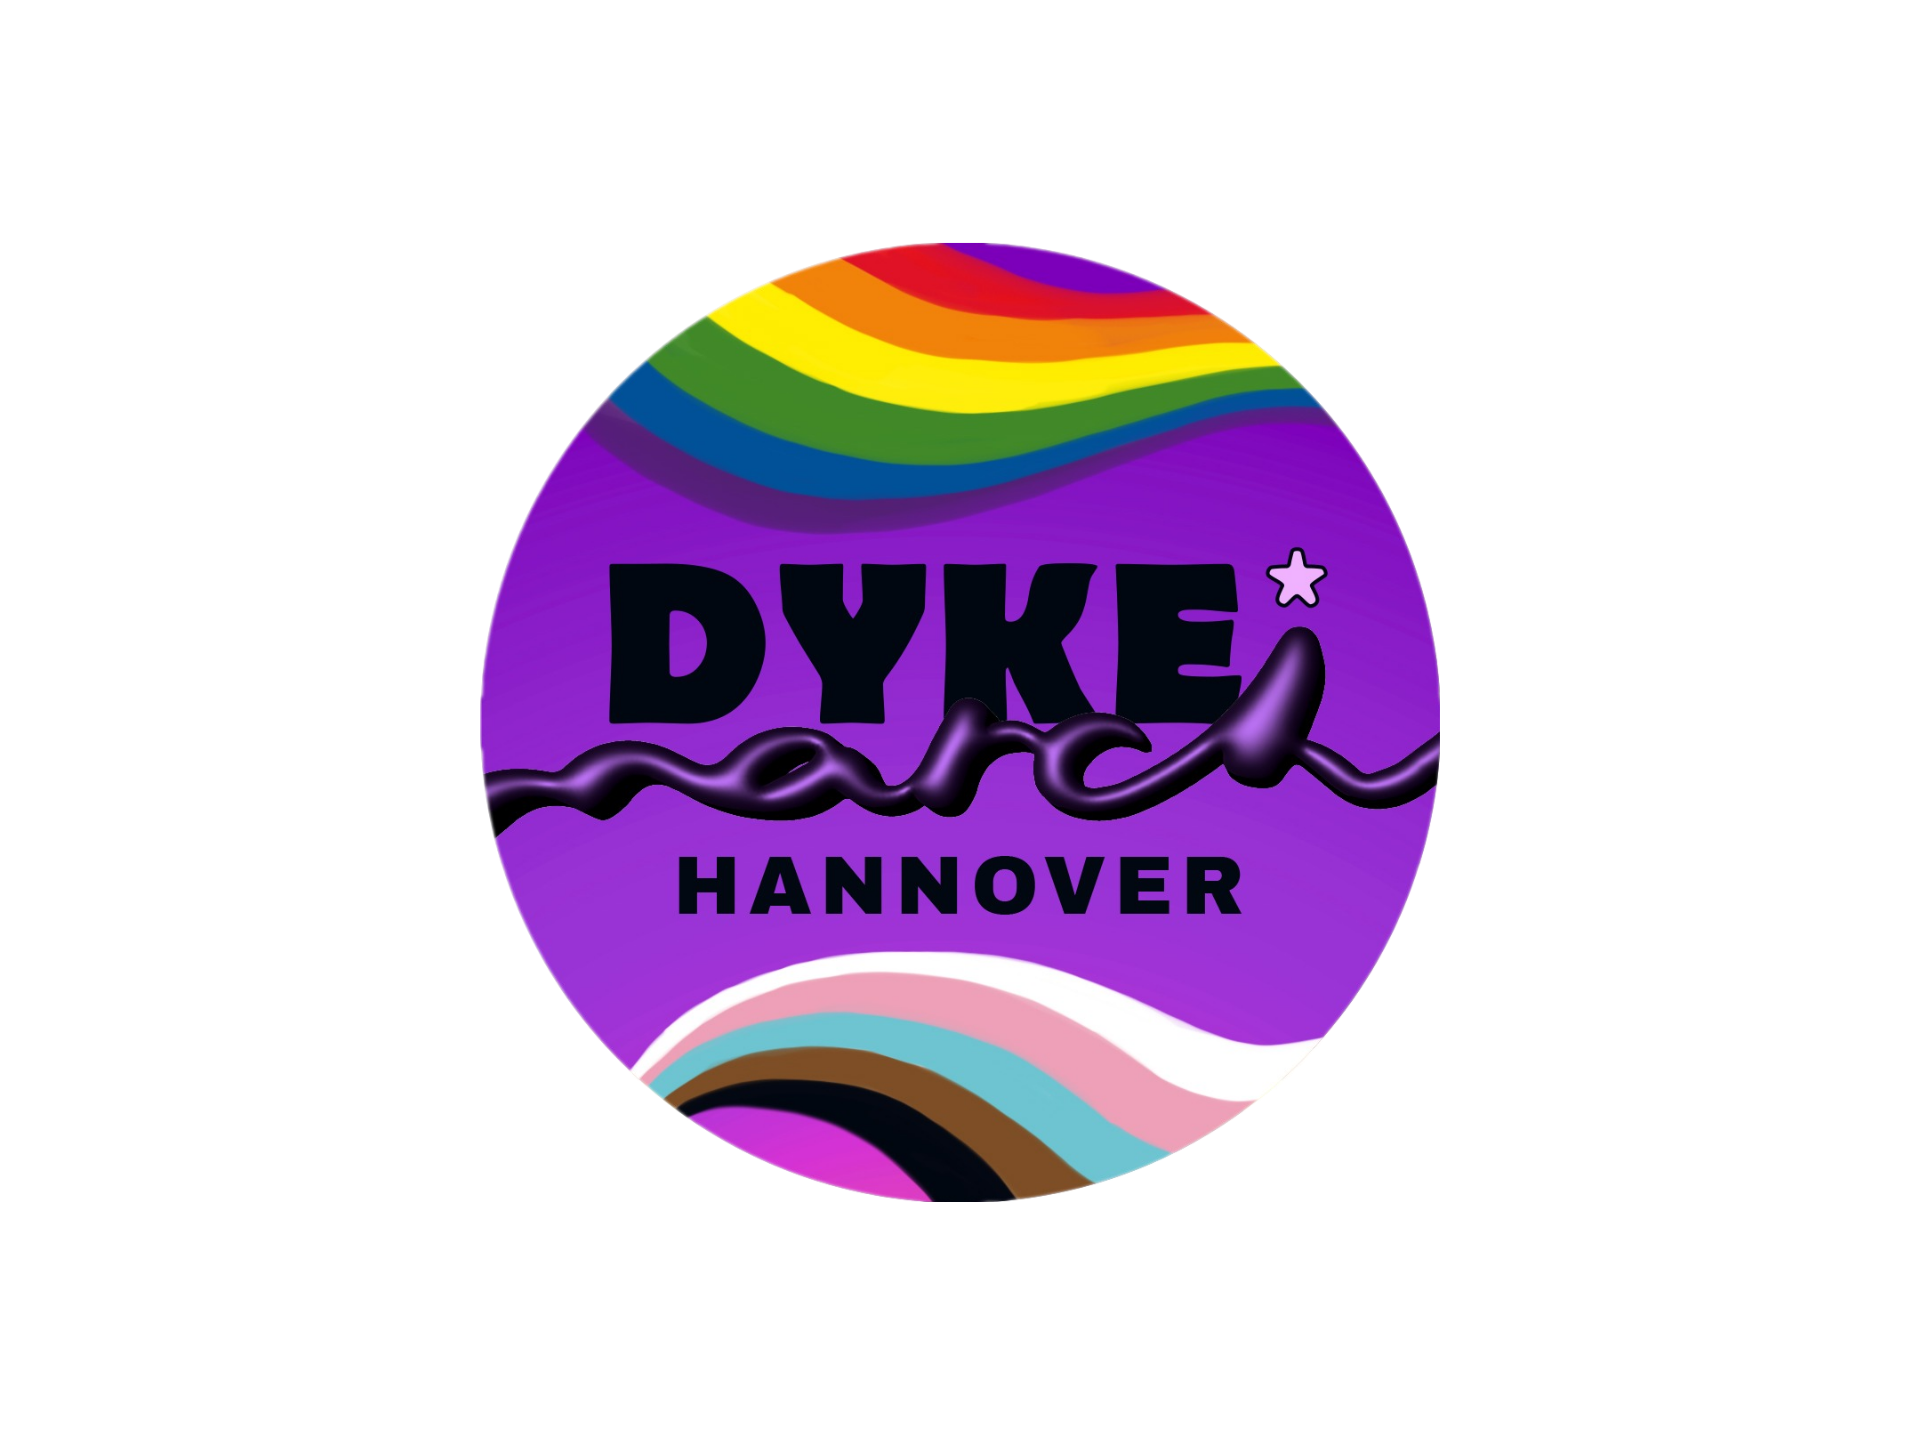 DYKE* MARCH HANNOVER